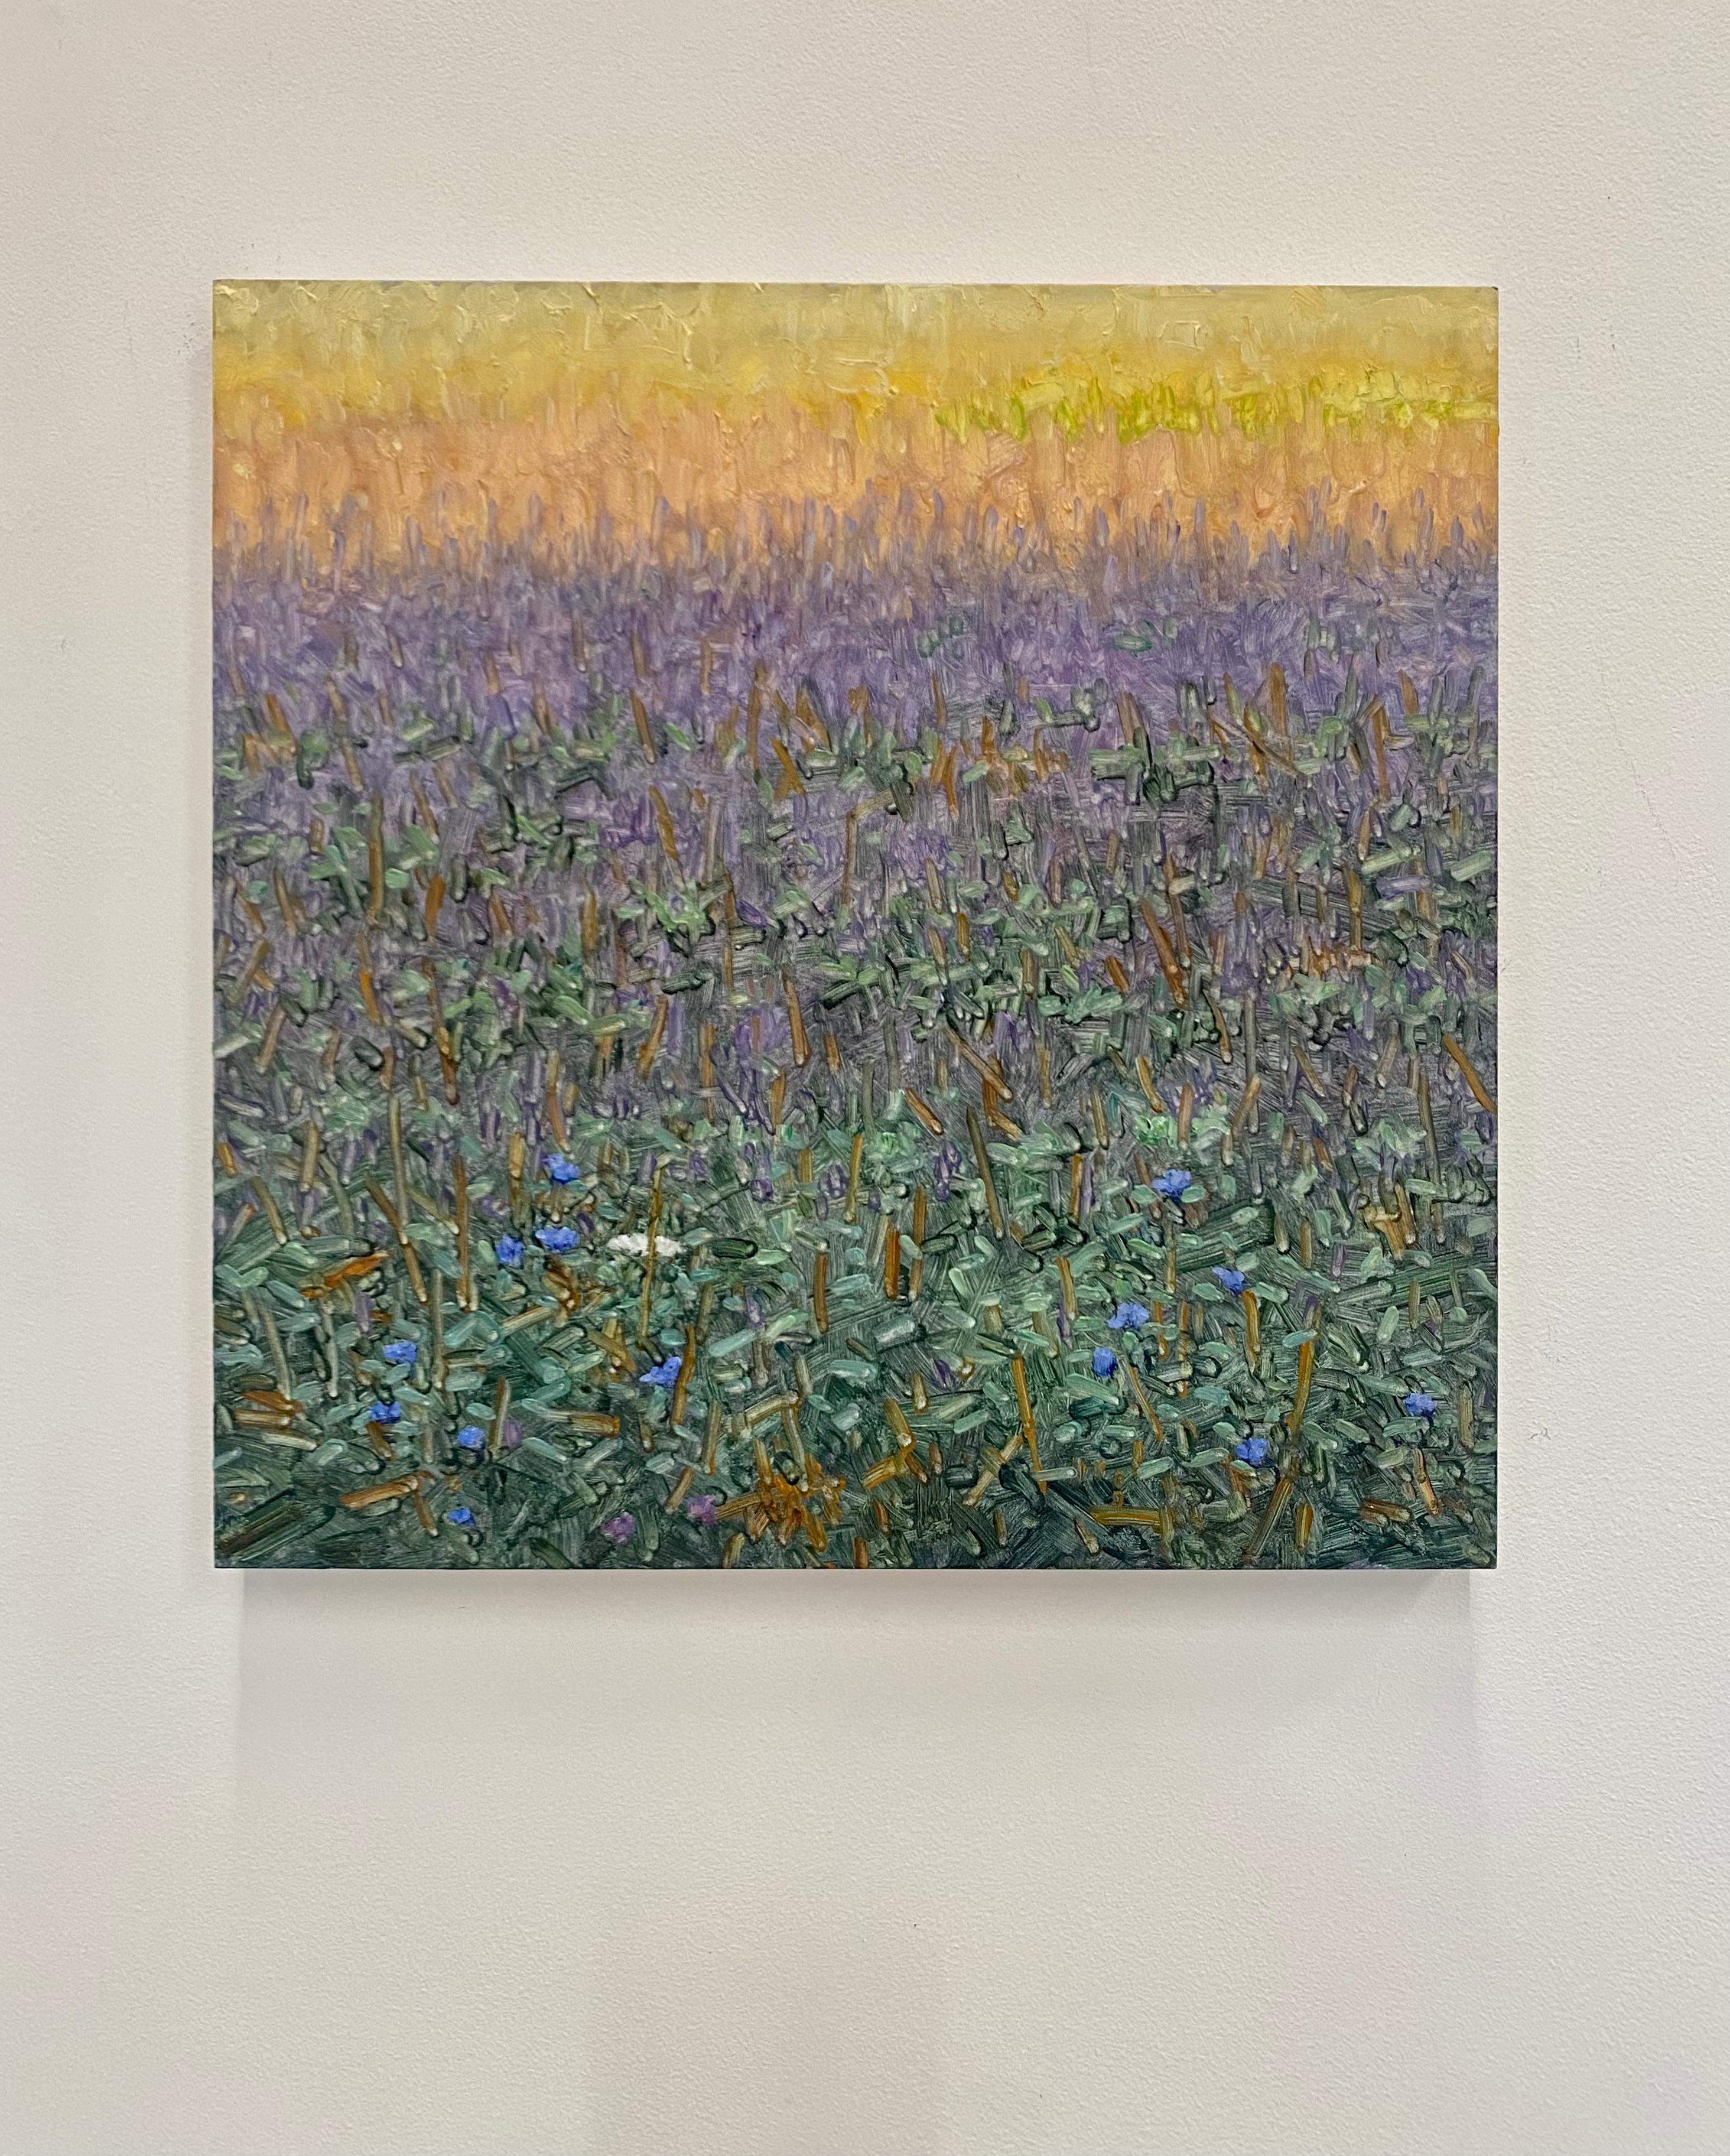 A peaceful outdoor scene of a delicately painted field with periwinkle blue, lavender and white flowers, beautifully capturing the idyllic feel of a field of wildflowers and tall grass in late July. Signed, dated and titled on verso.

The paintings